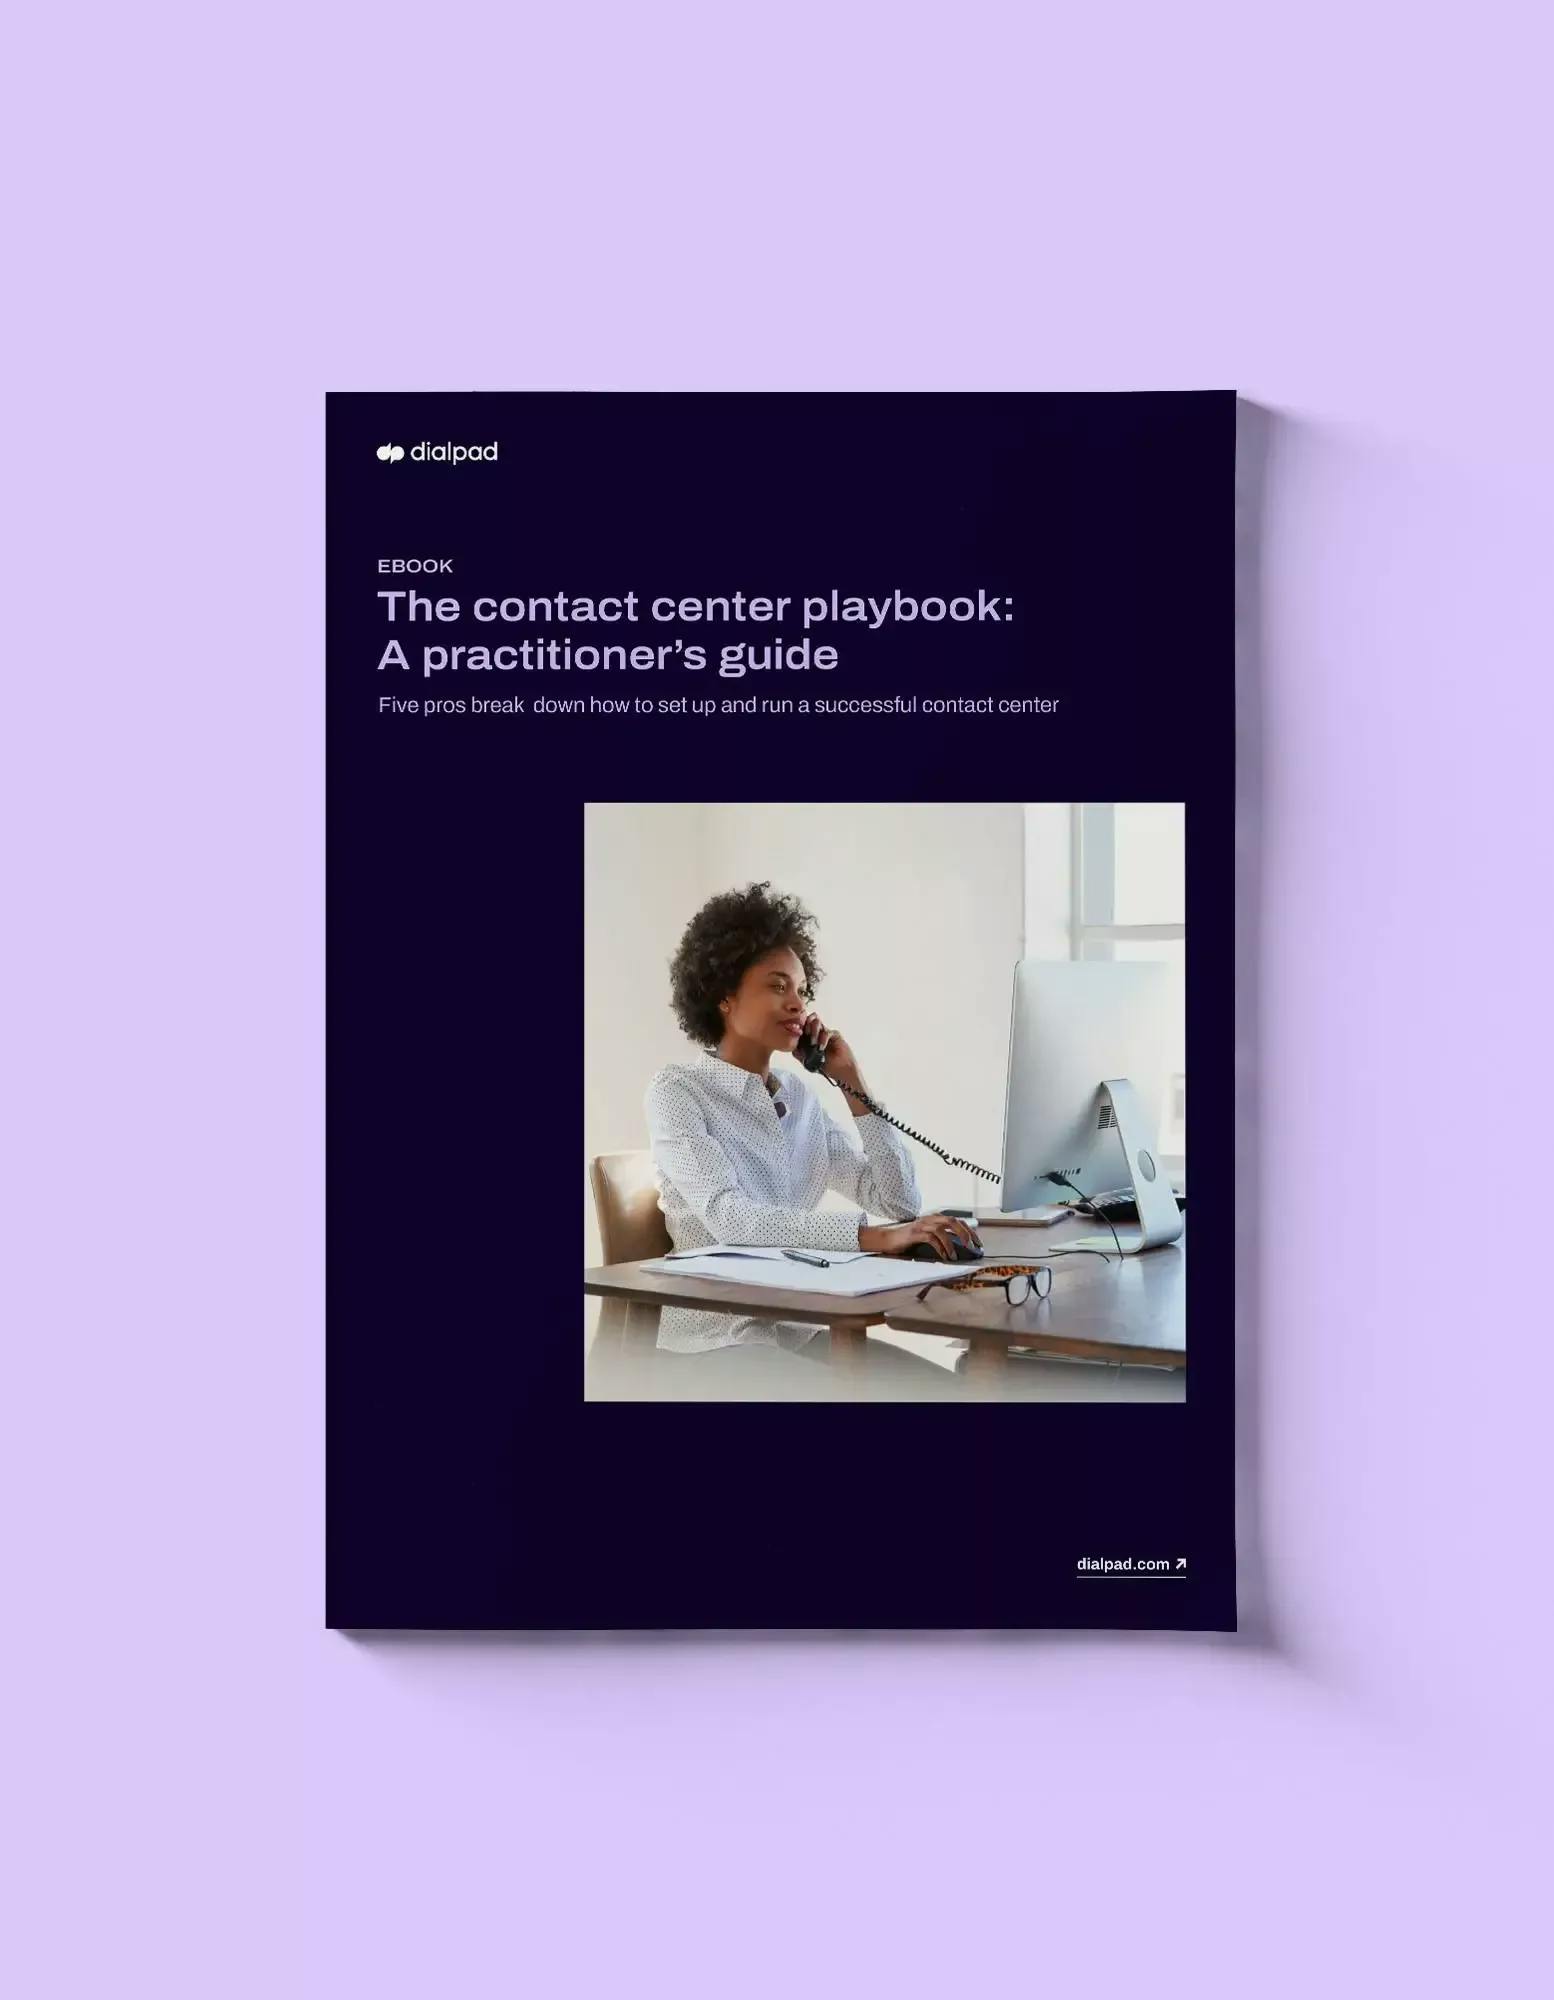 The Contact Center Playbook 1.0: A Practitioner's Guide